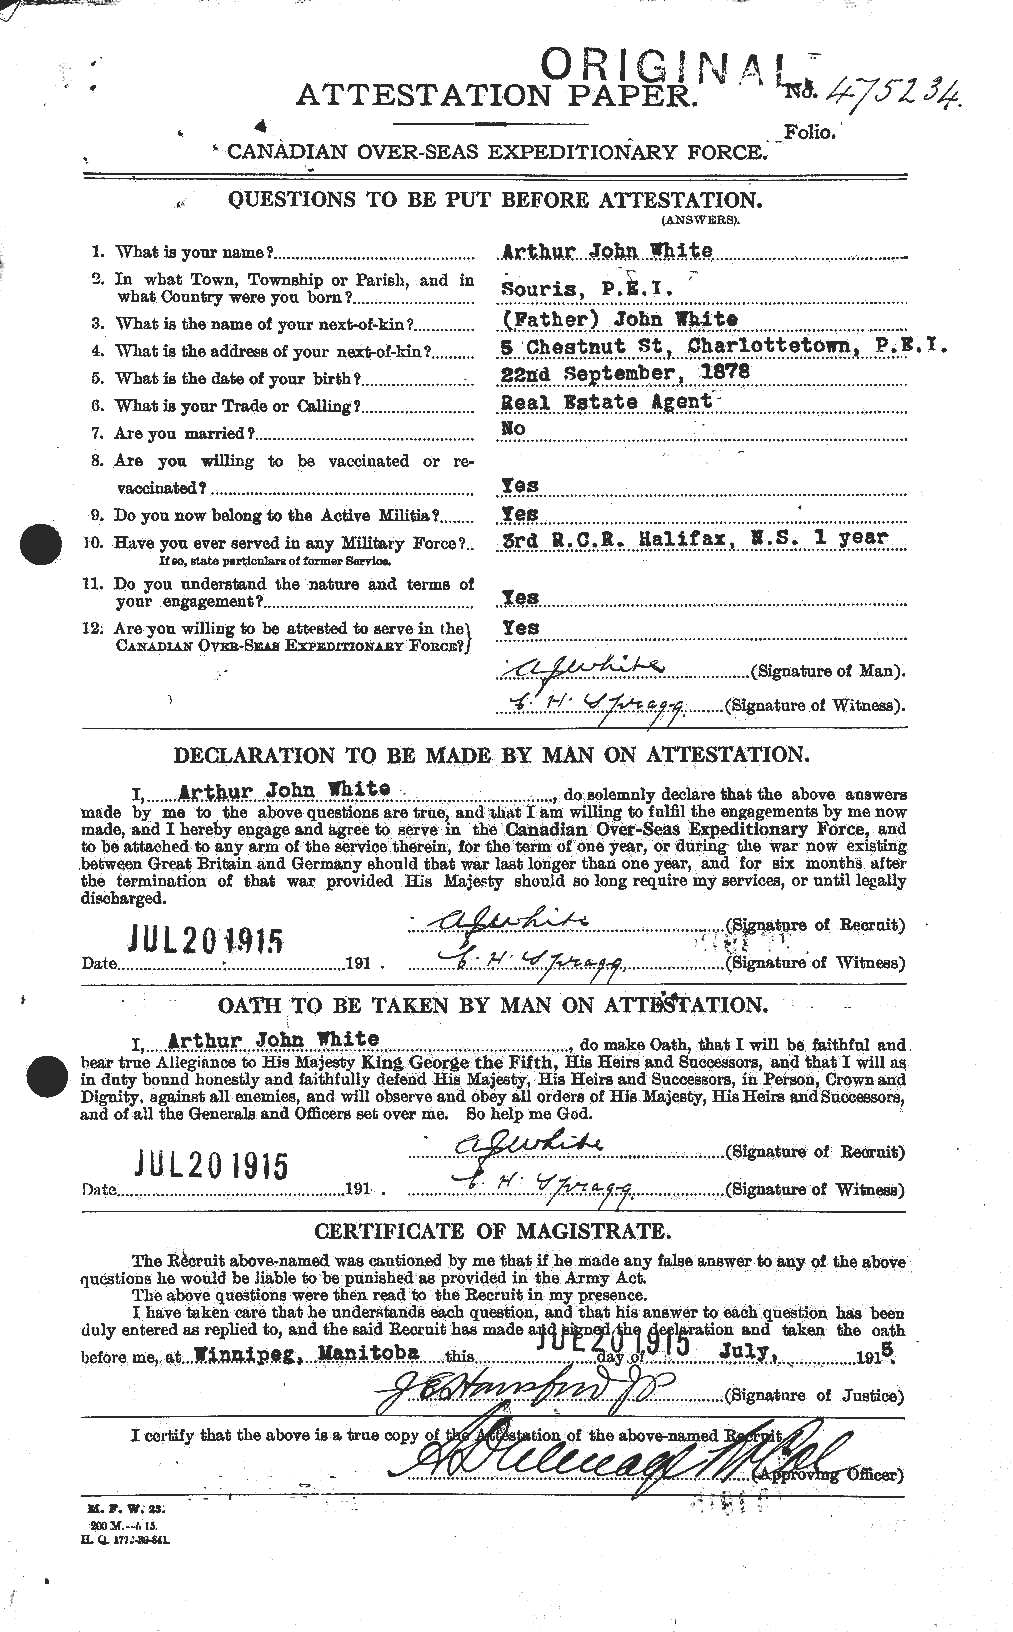 Personnel Records of the First World War - CEF 669847a